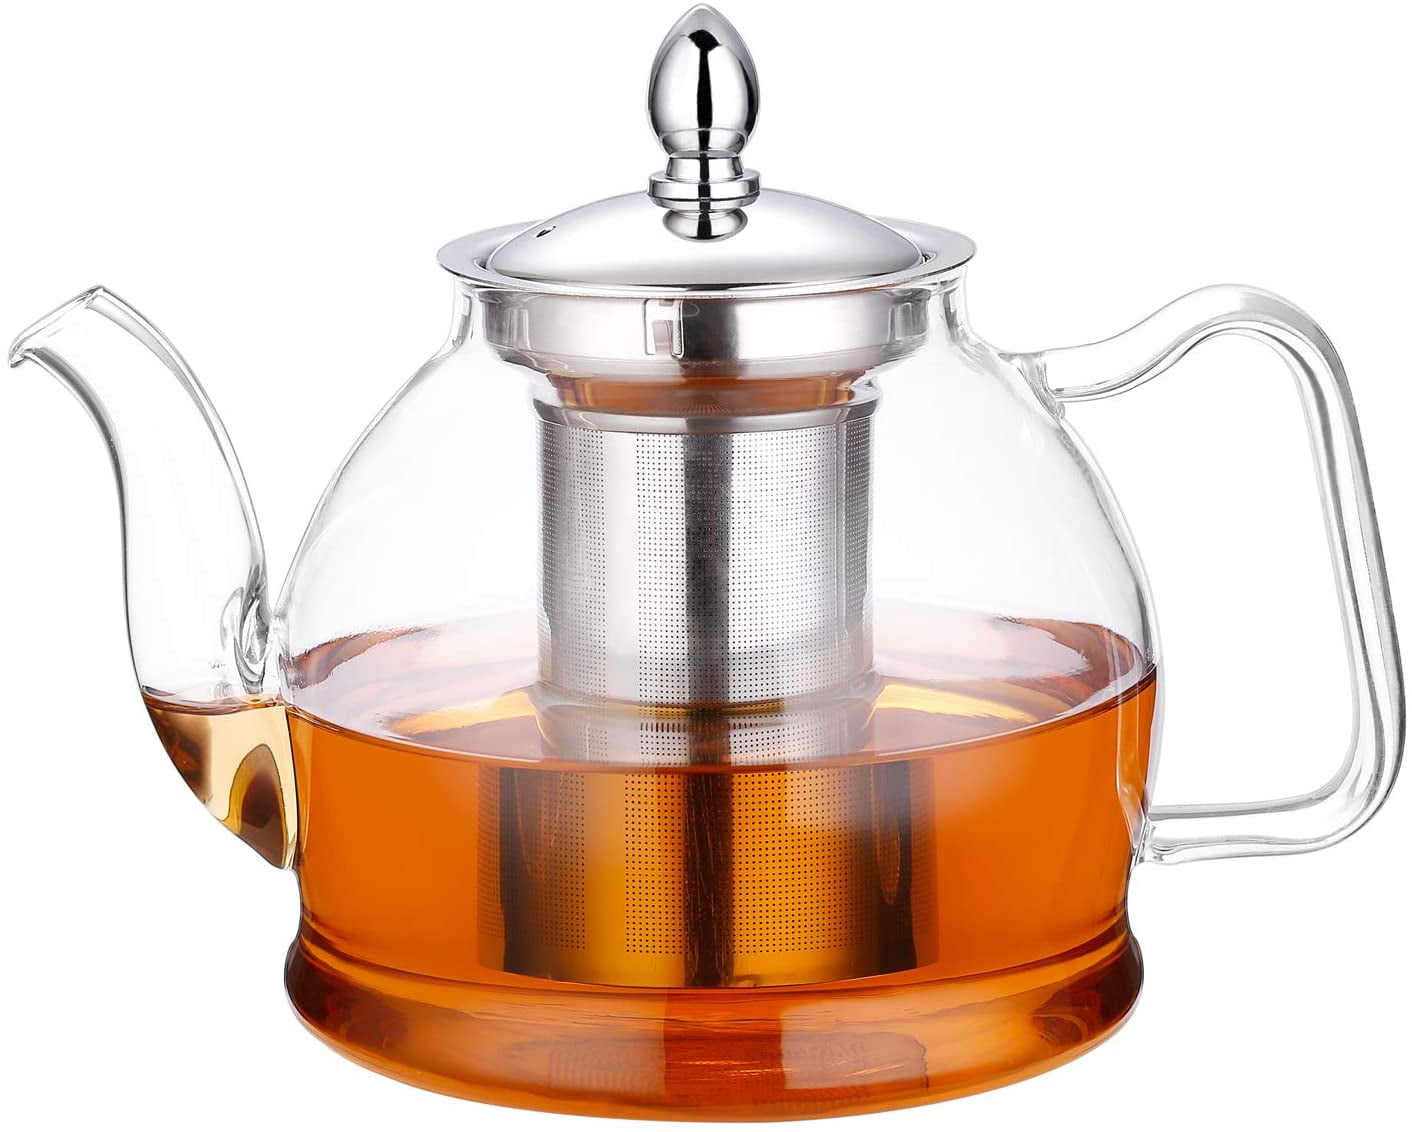 Stovetop Safe Teapot Stovetop and Removable Infuser Clear Borosilicate Glass 